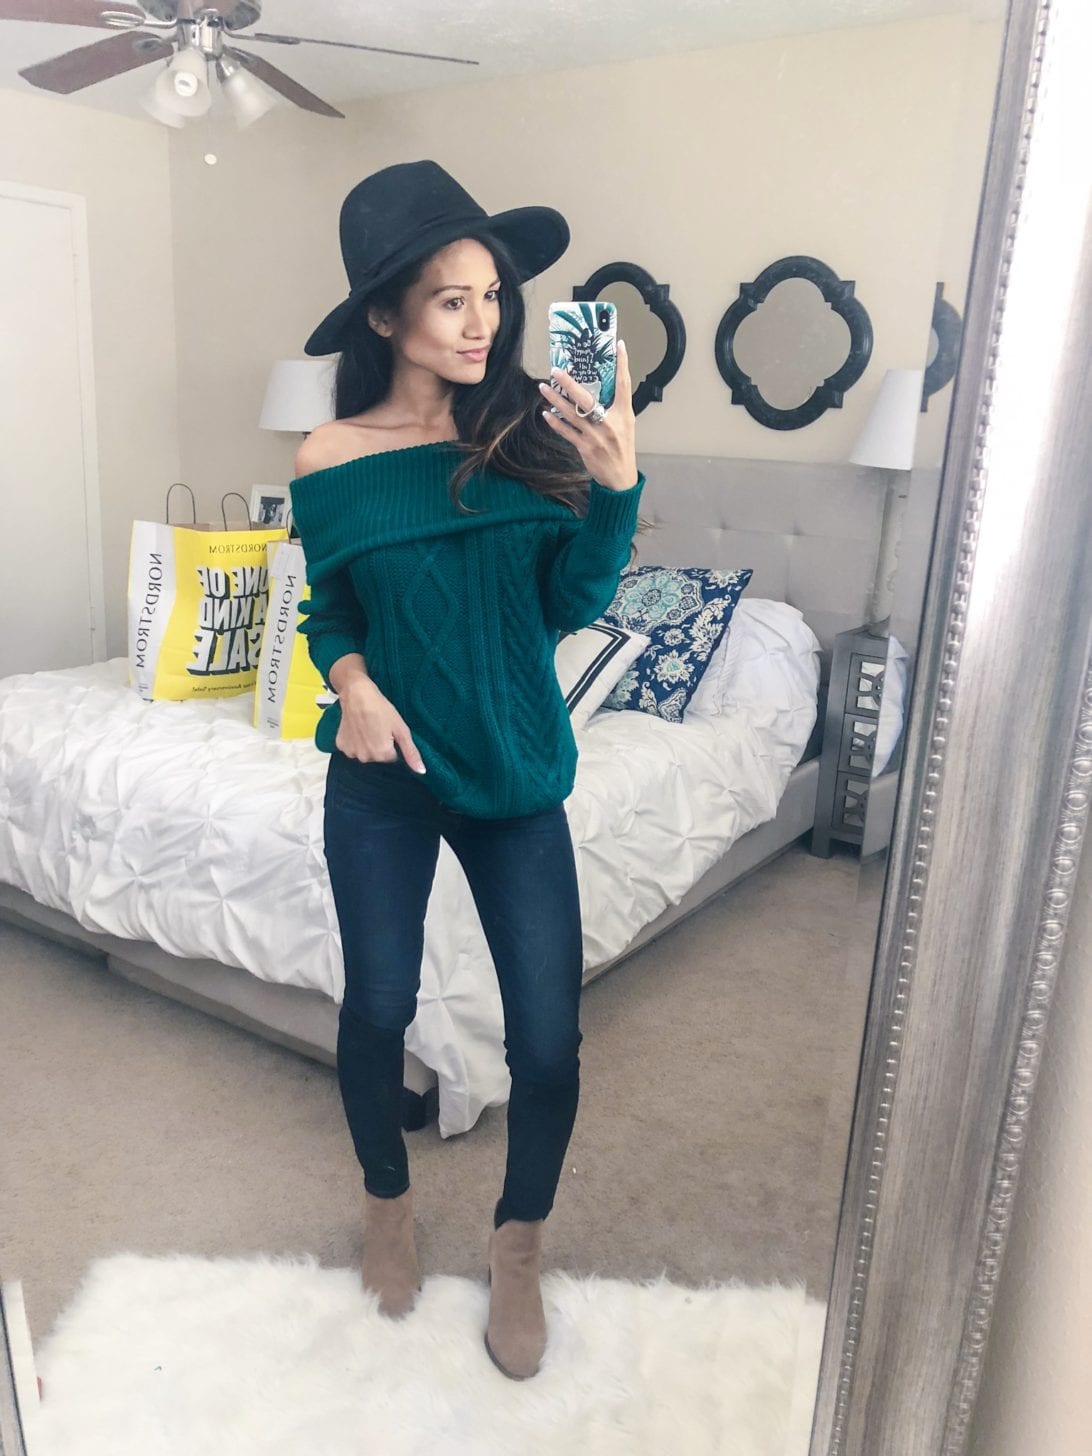 nordstrom anniversary sale, try-on session, love it or leave it, petite style, petite fashion, off the shoulder sweater, fall style, black Panama hat